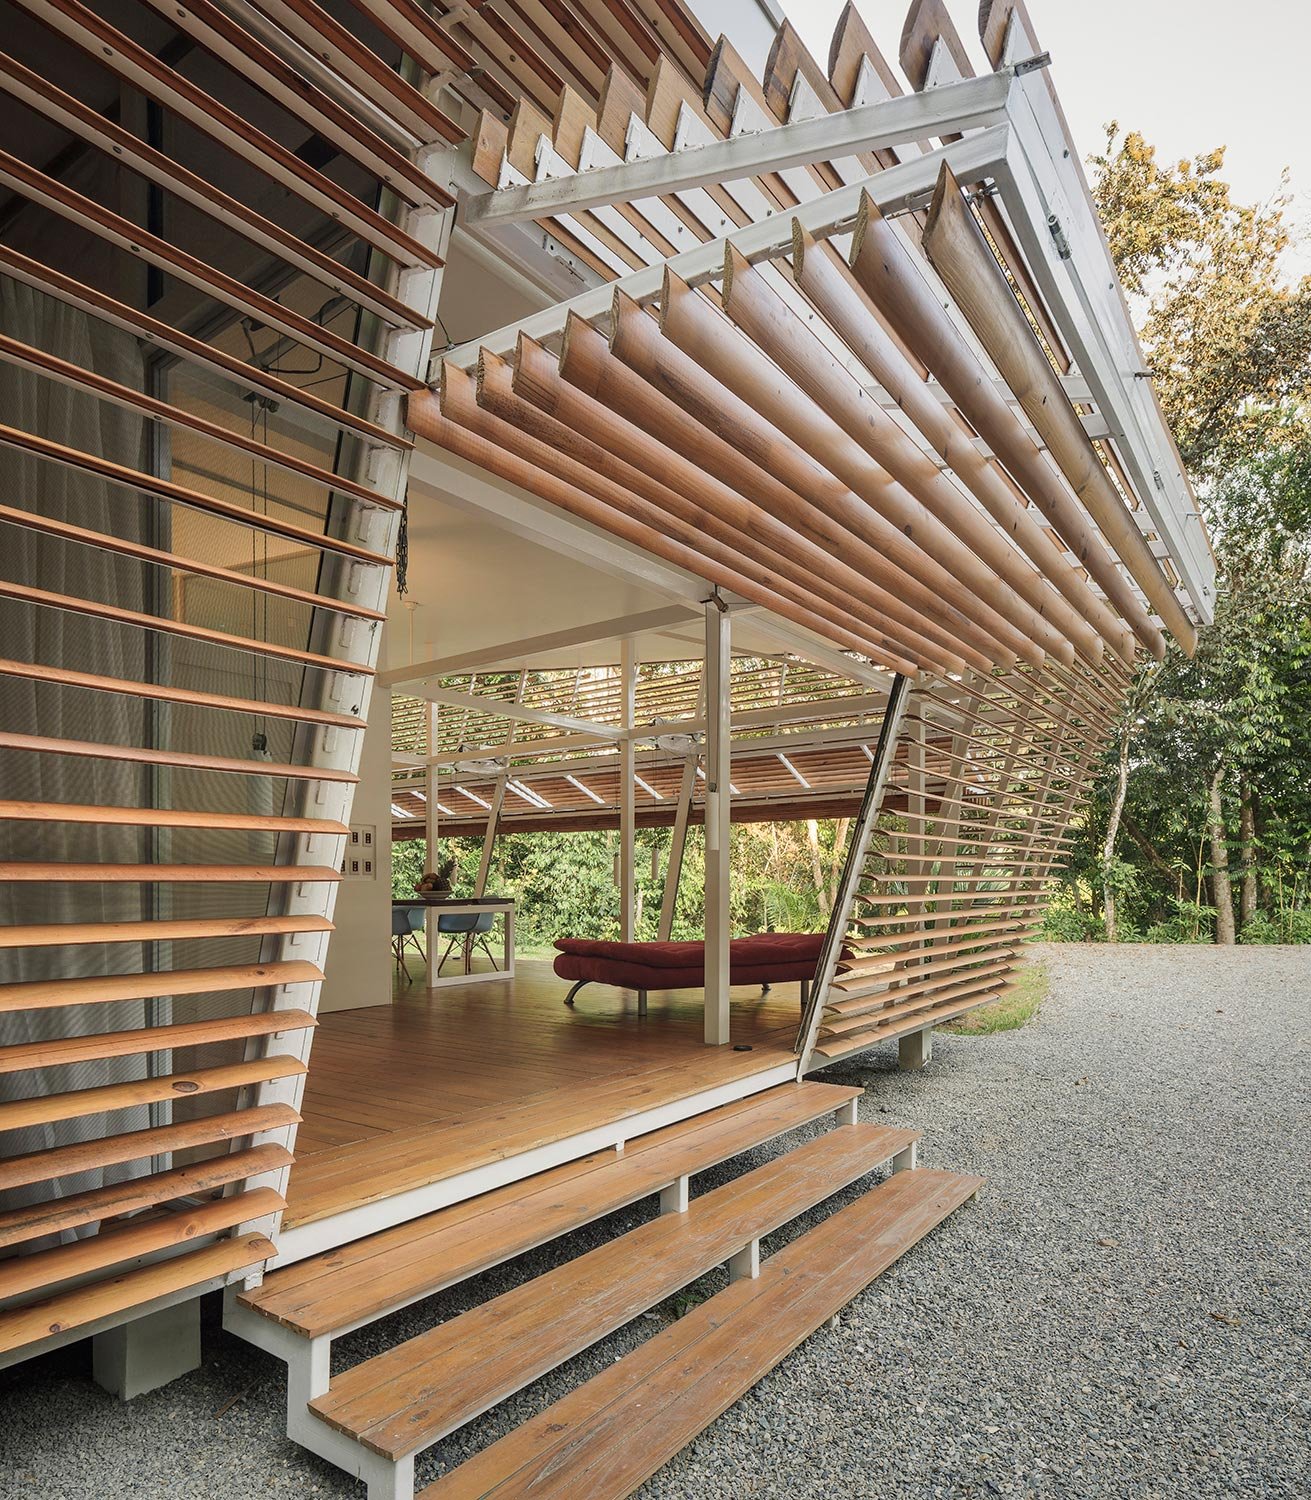 The outer timber-slat walls are set at an incline to reduce the direct impact of sunlight and rainwater. | Fernando Alda